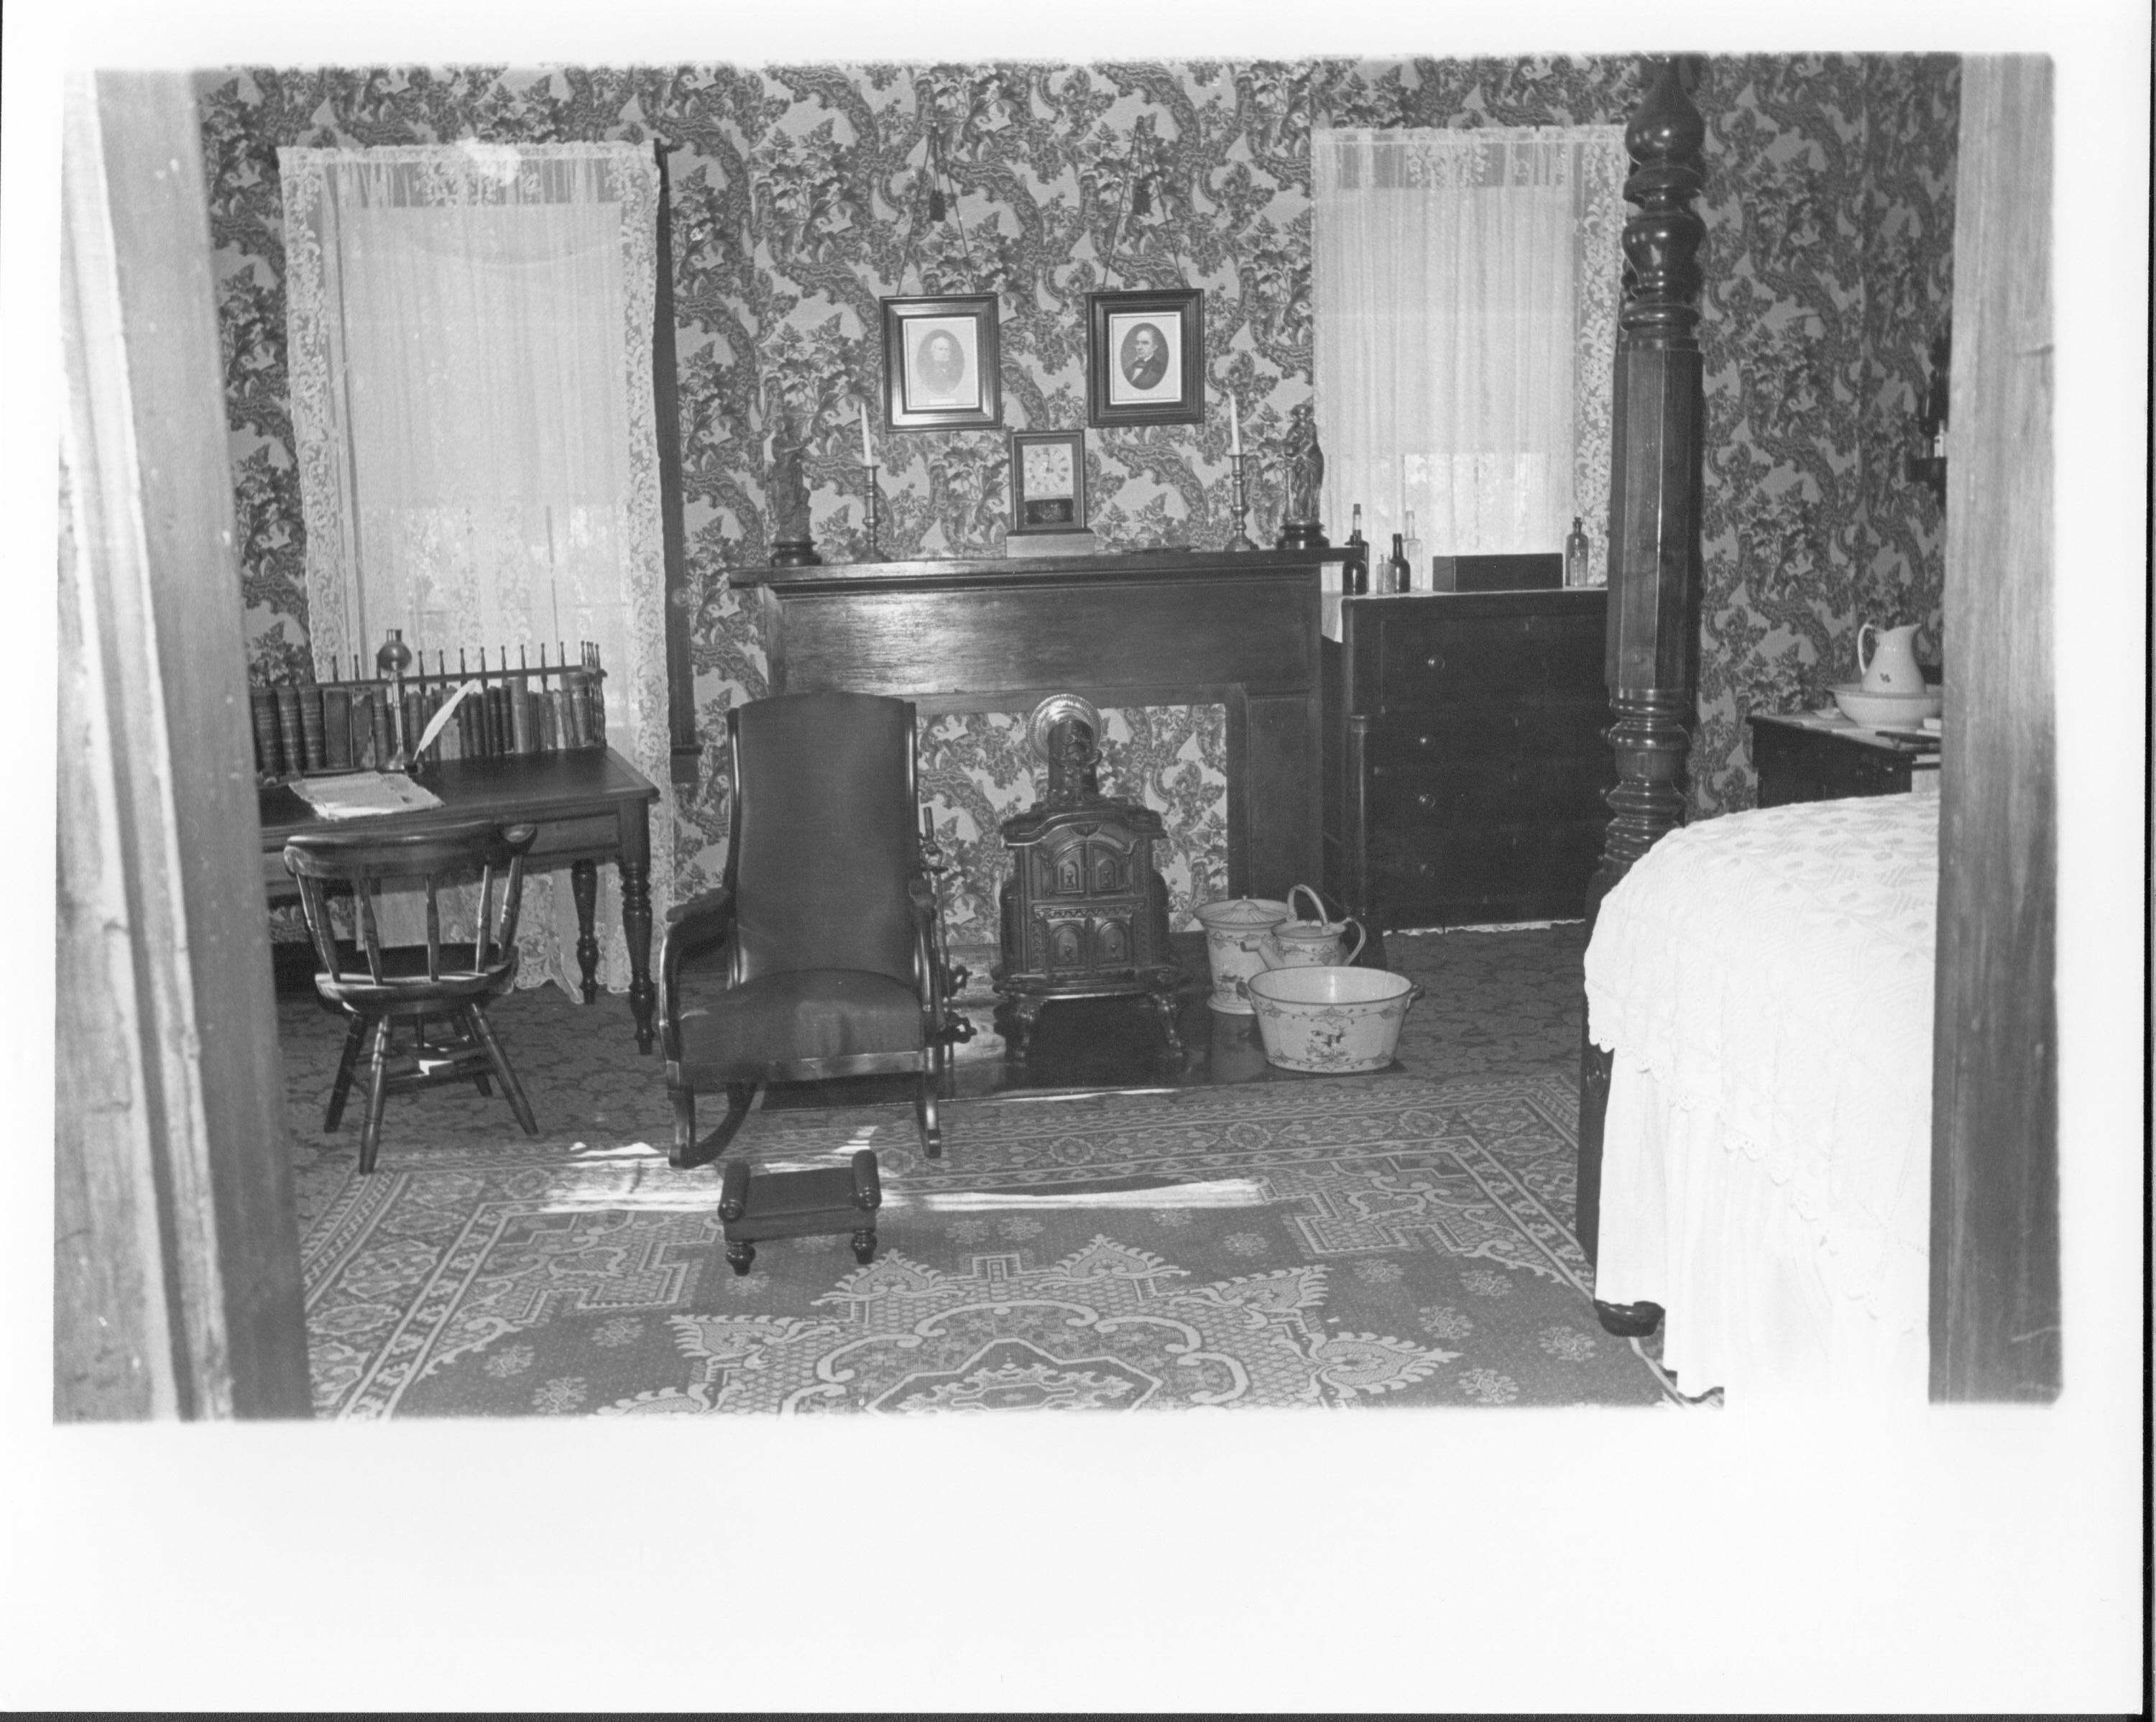 NA Lincoln Bedroom Lincoln Home, Bedroom, fireplace, windows, rocking chair, desk